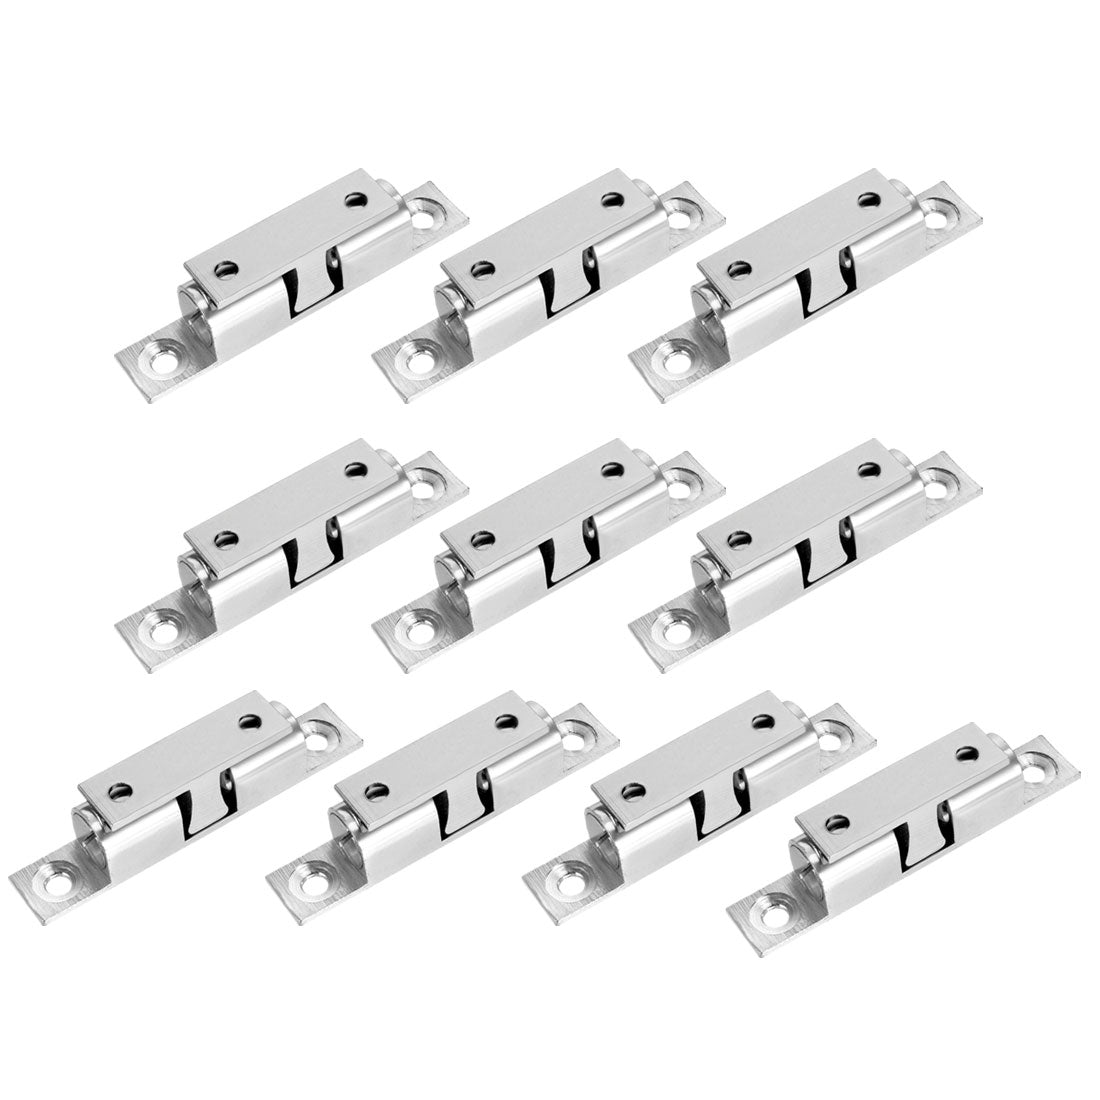 uxcell Uxcell 10pcs Cabinet Door Closet Brass Double Ball Catch Tension Latch 70mm Length Silver Tone